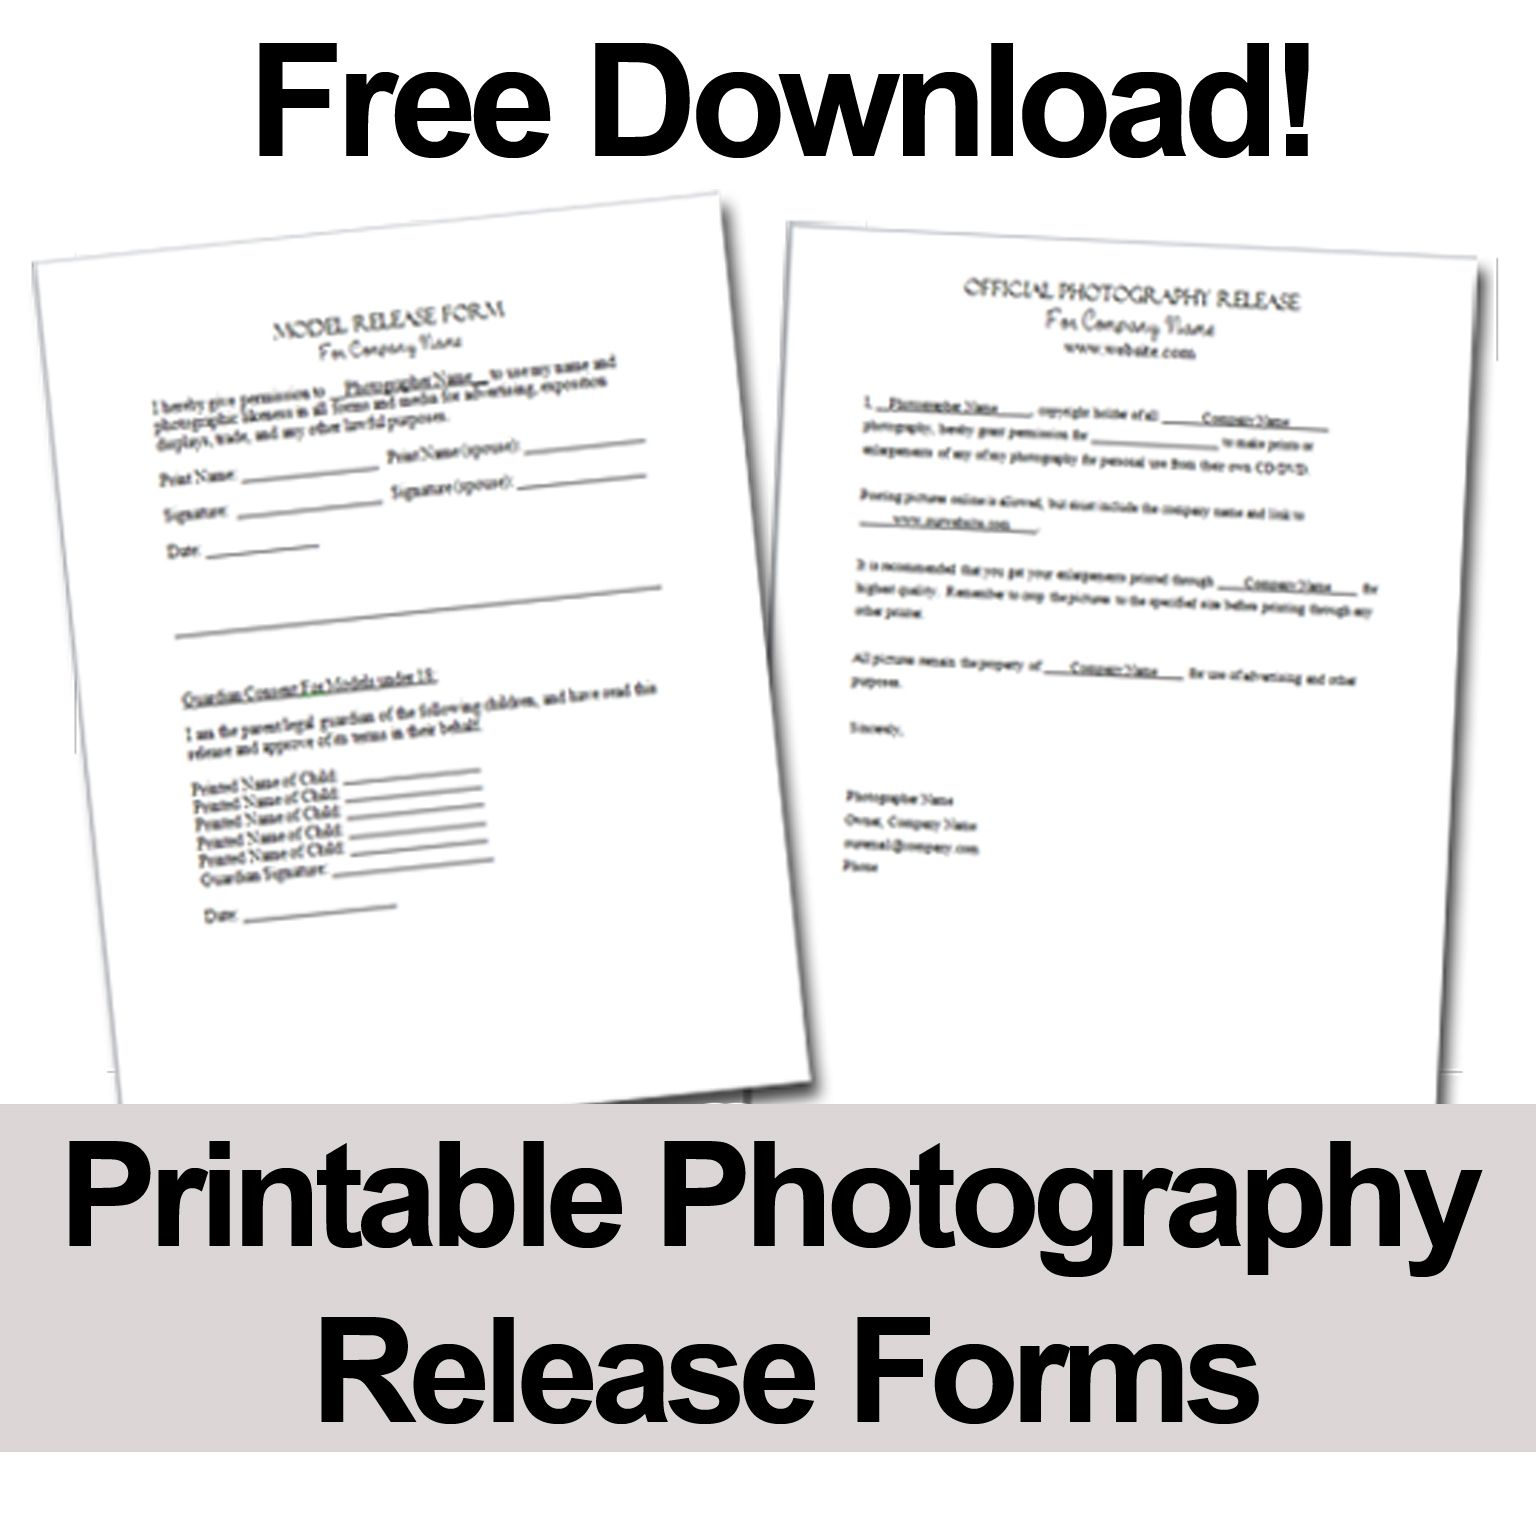 Print These Free Photography Release Forms To Give Your Clients - Free Printable Photo Release Form